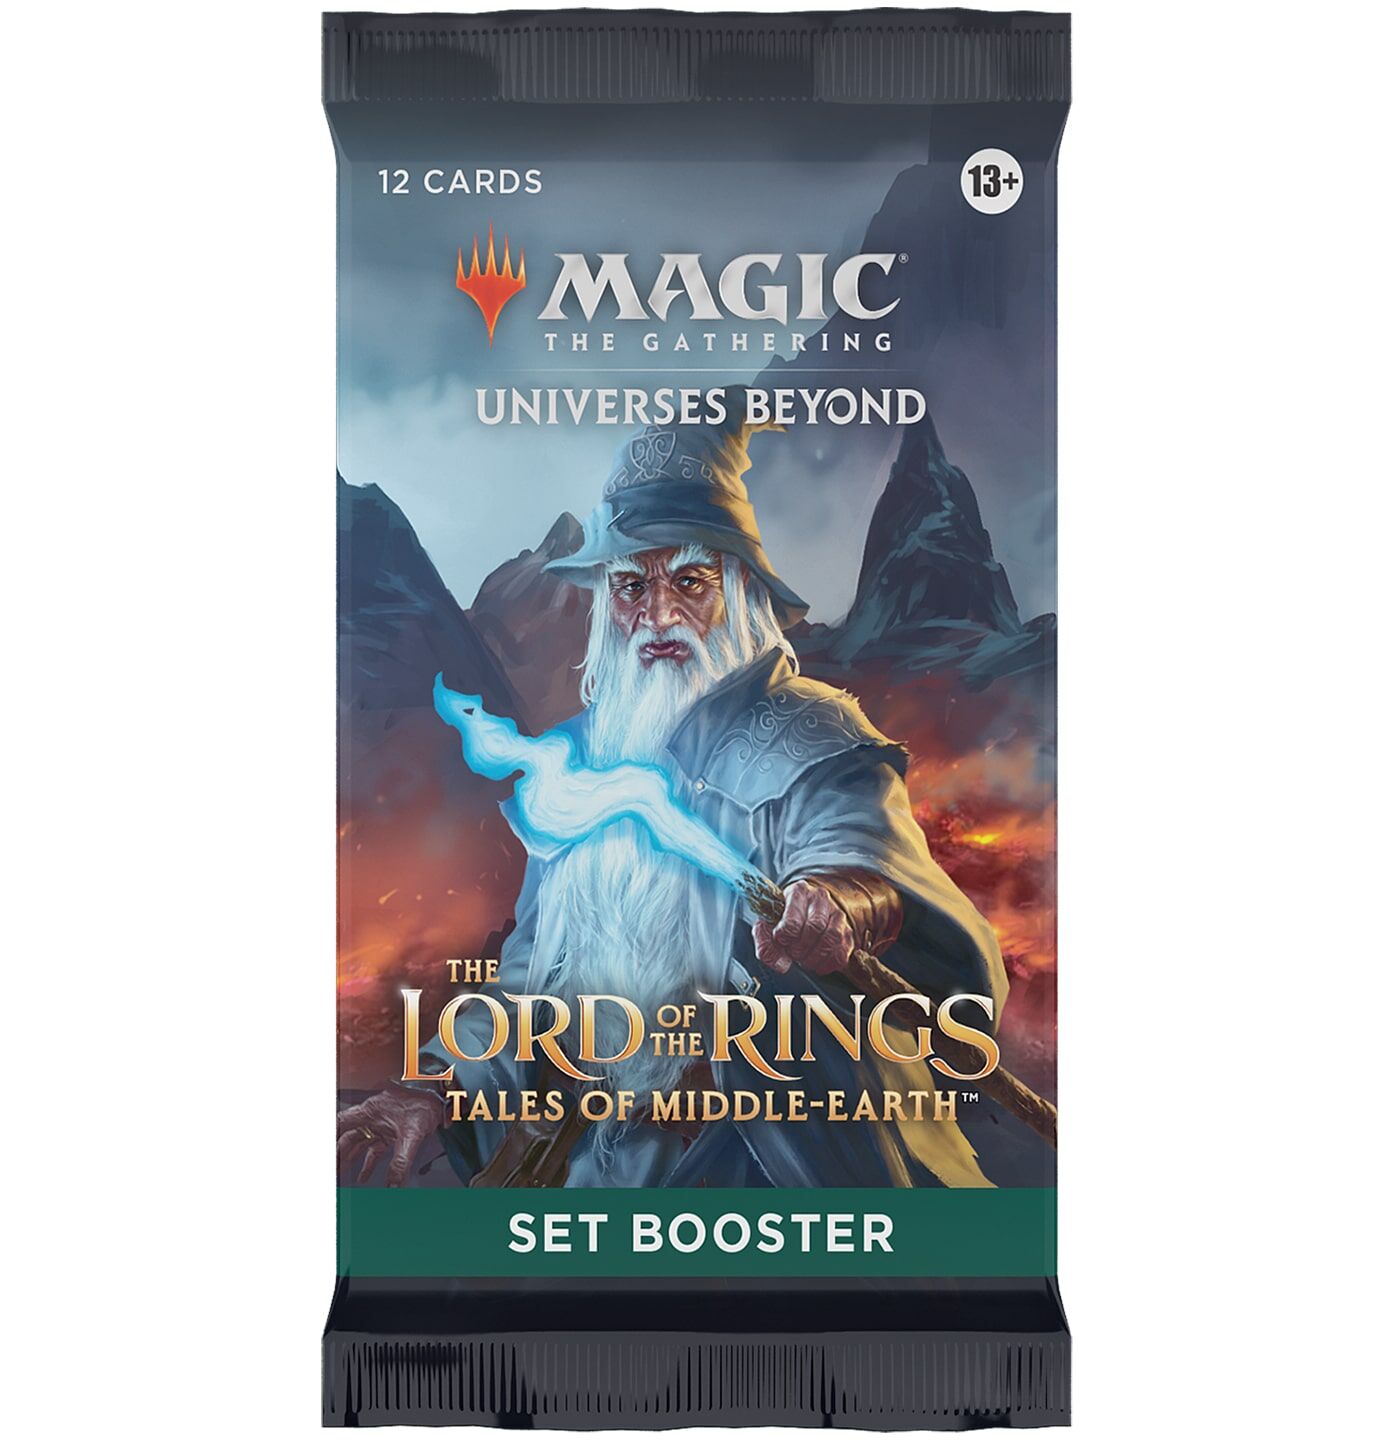 The Lord of the Rings: Tales of Middle-earth™ Set Booster - Magic the Gathering - EN